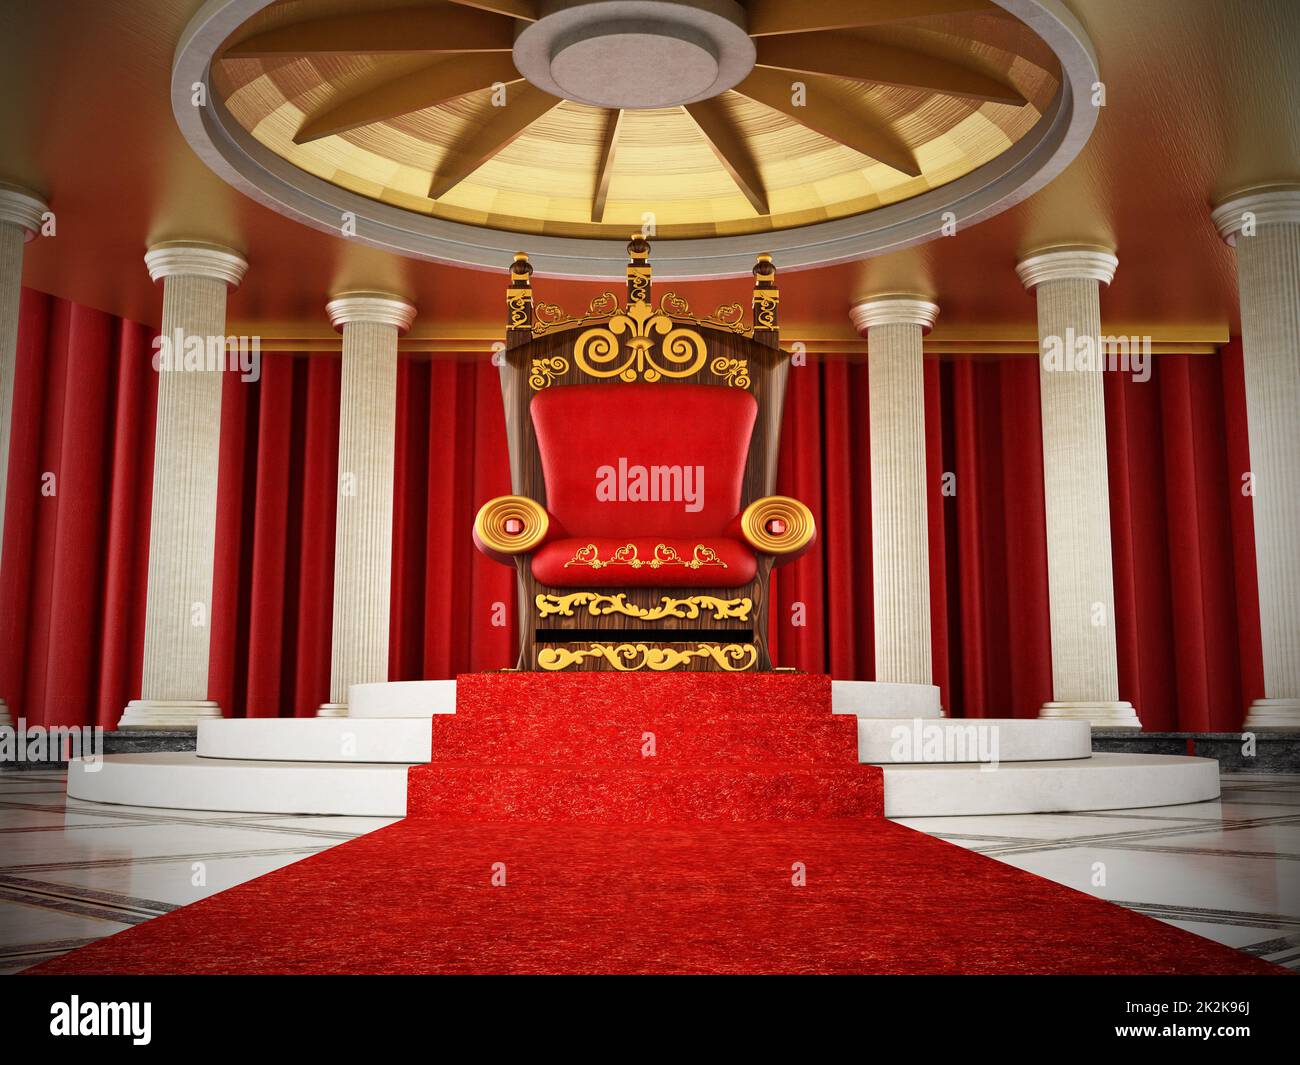 Red carpet leading to the luxurious throne. 3D illustration Stock Photo